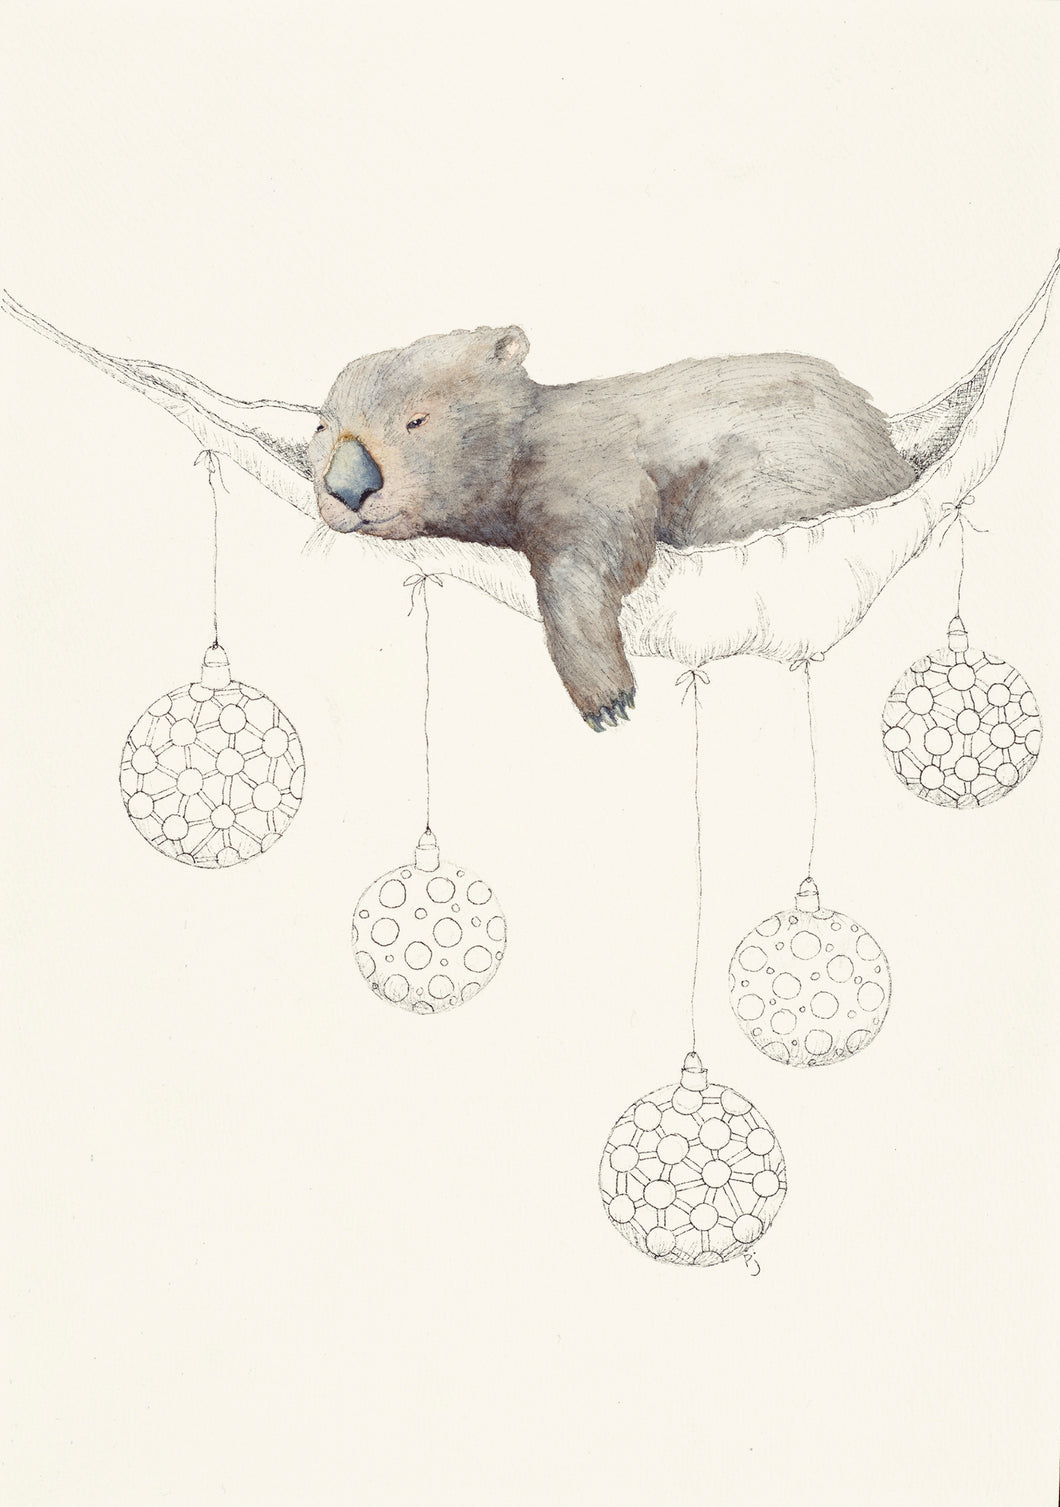 This is a water colour painting of a sleepy wombat that is patiently waiting the arrival of Santa Claus. The wombat is painted but the rest of the picture is drawn in Artline pen. The wombat is resting in a hammock that has been tastefully decorated with bobbles. The original is in a black frame with black matting, which makes the picture 